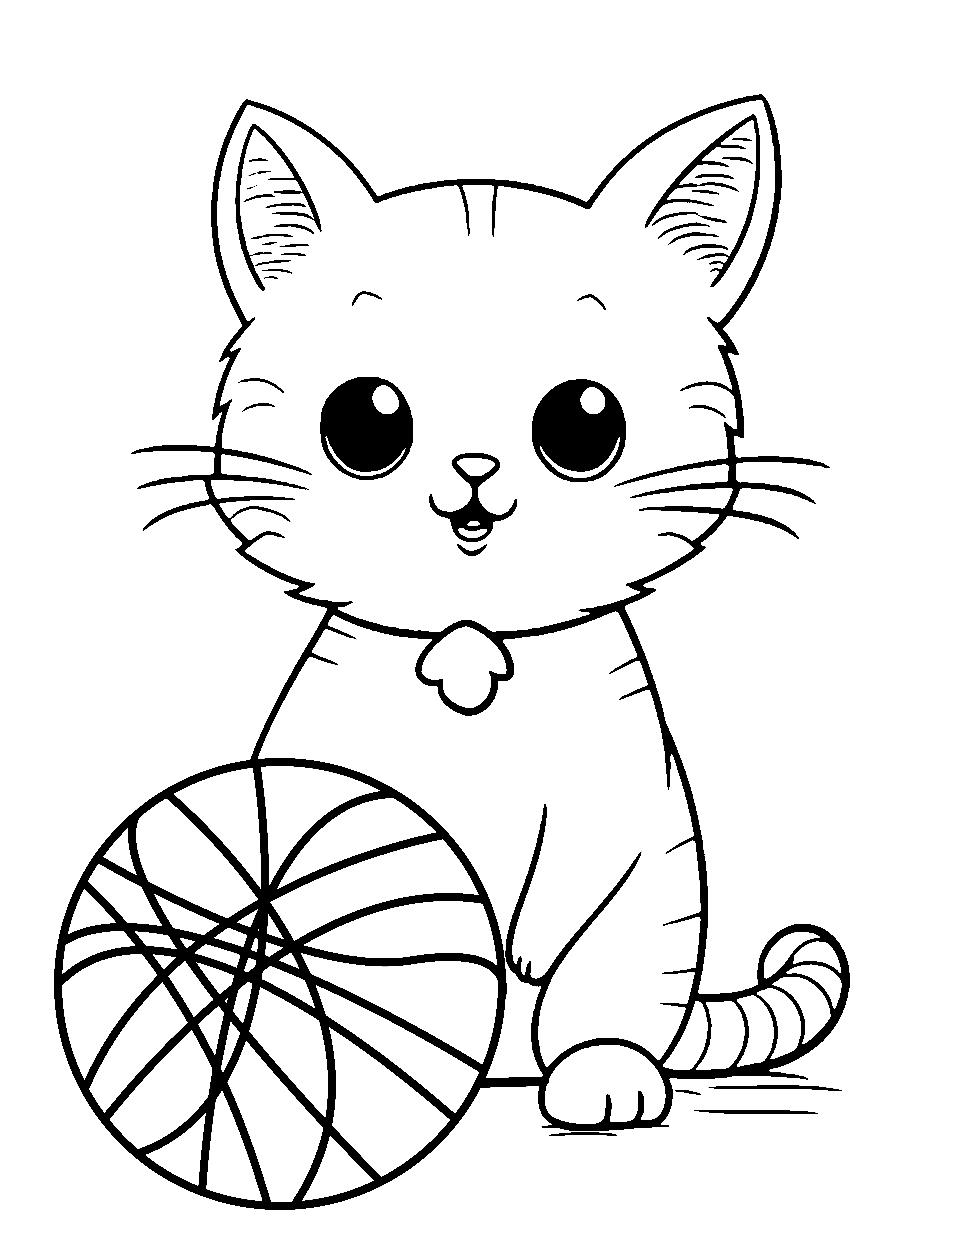 Kitten Cuddles Coloring Page - A kitten playing with a ball of yarn.